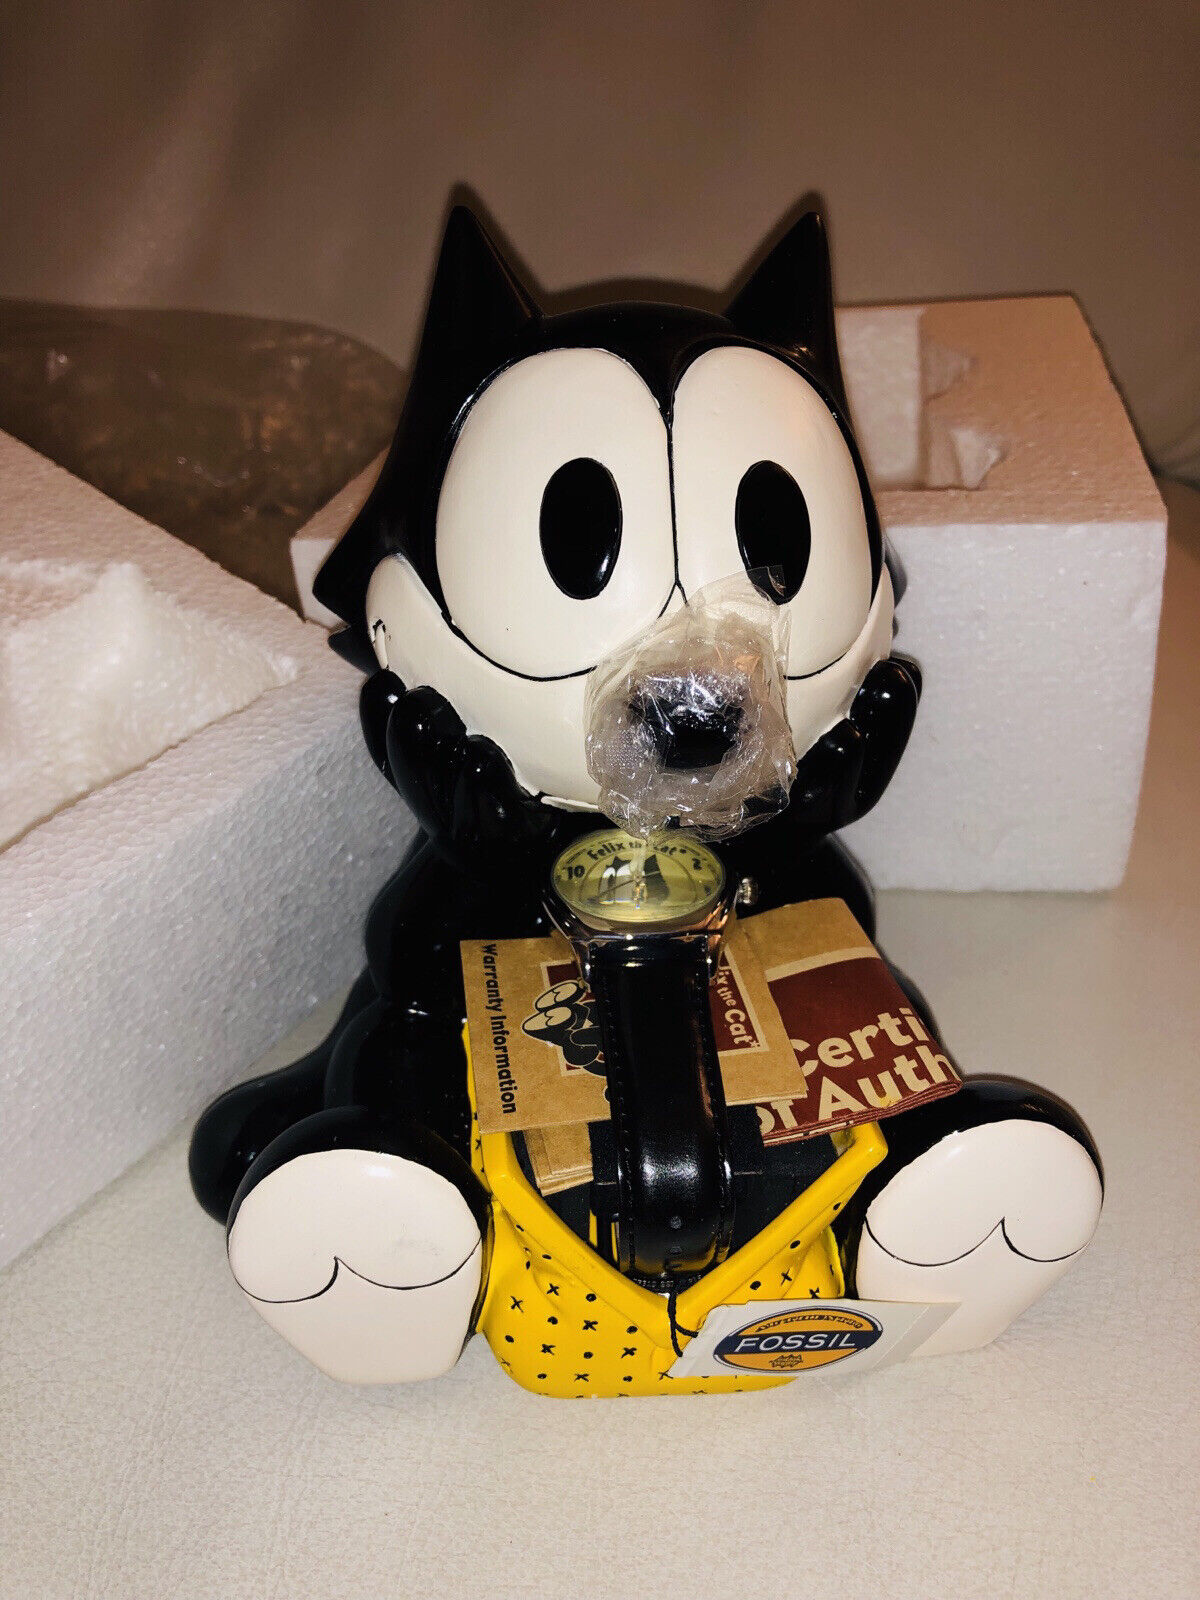 david fernyhough recommends watch felix the cat pic